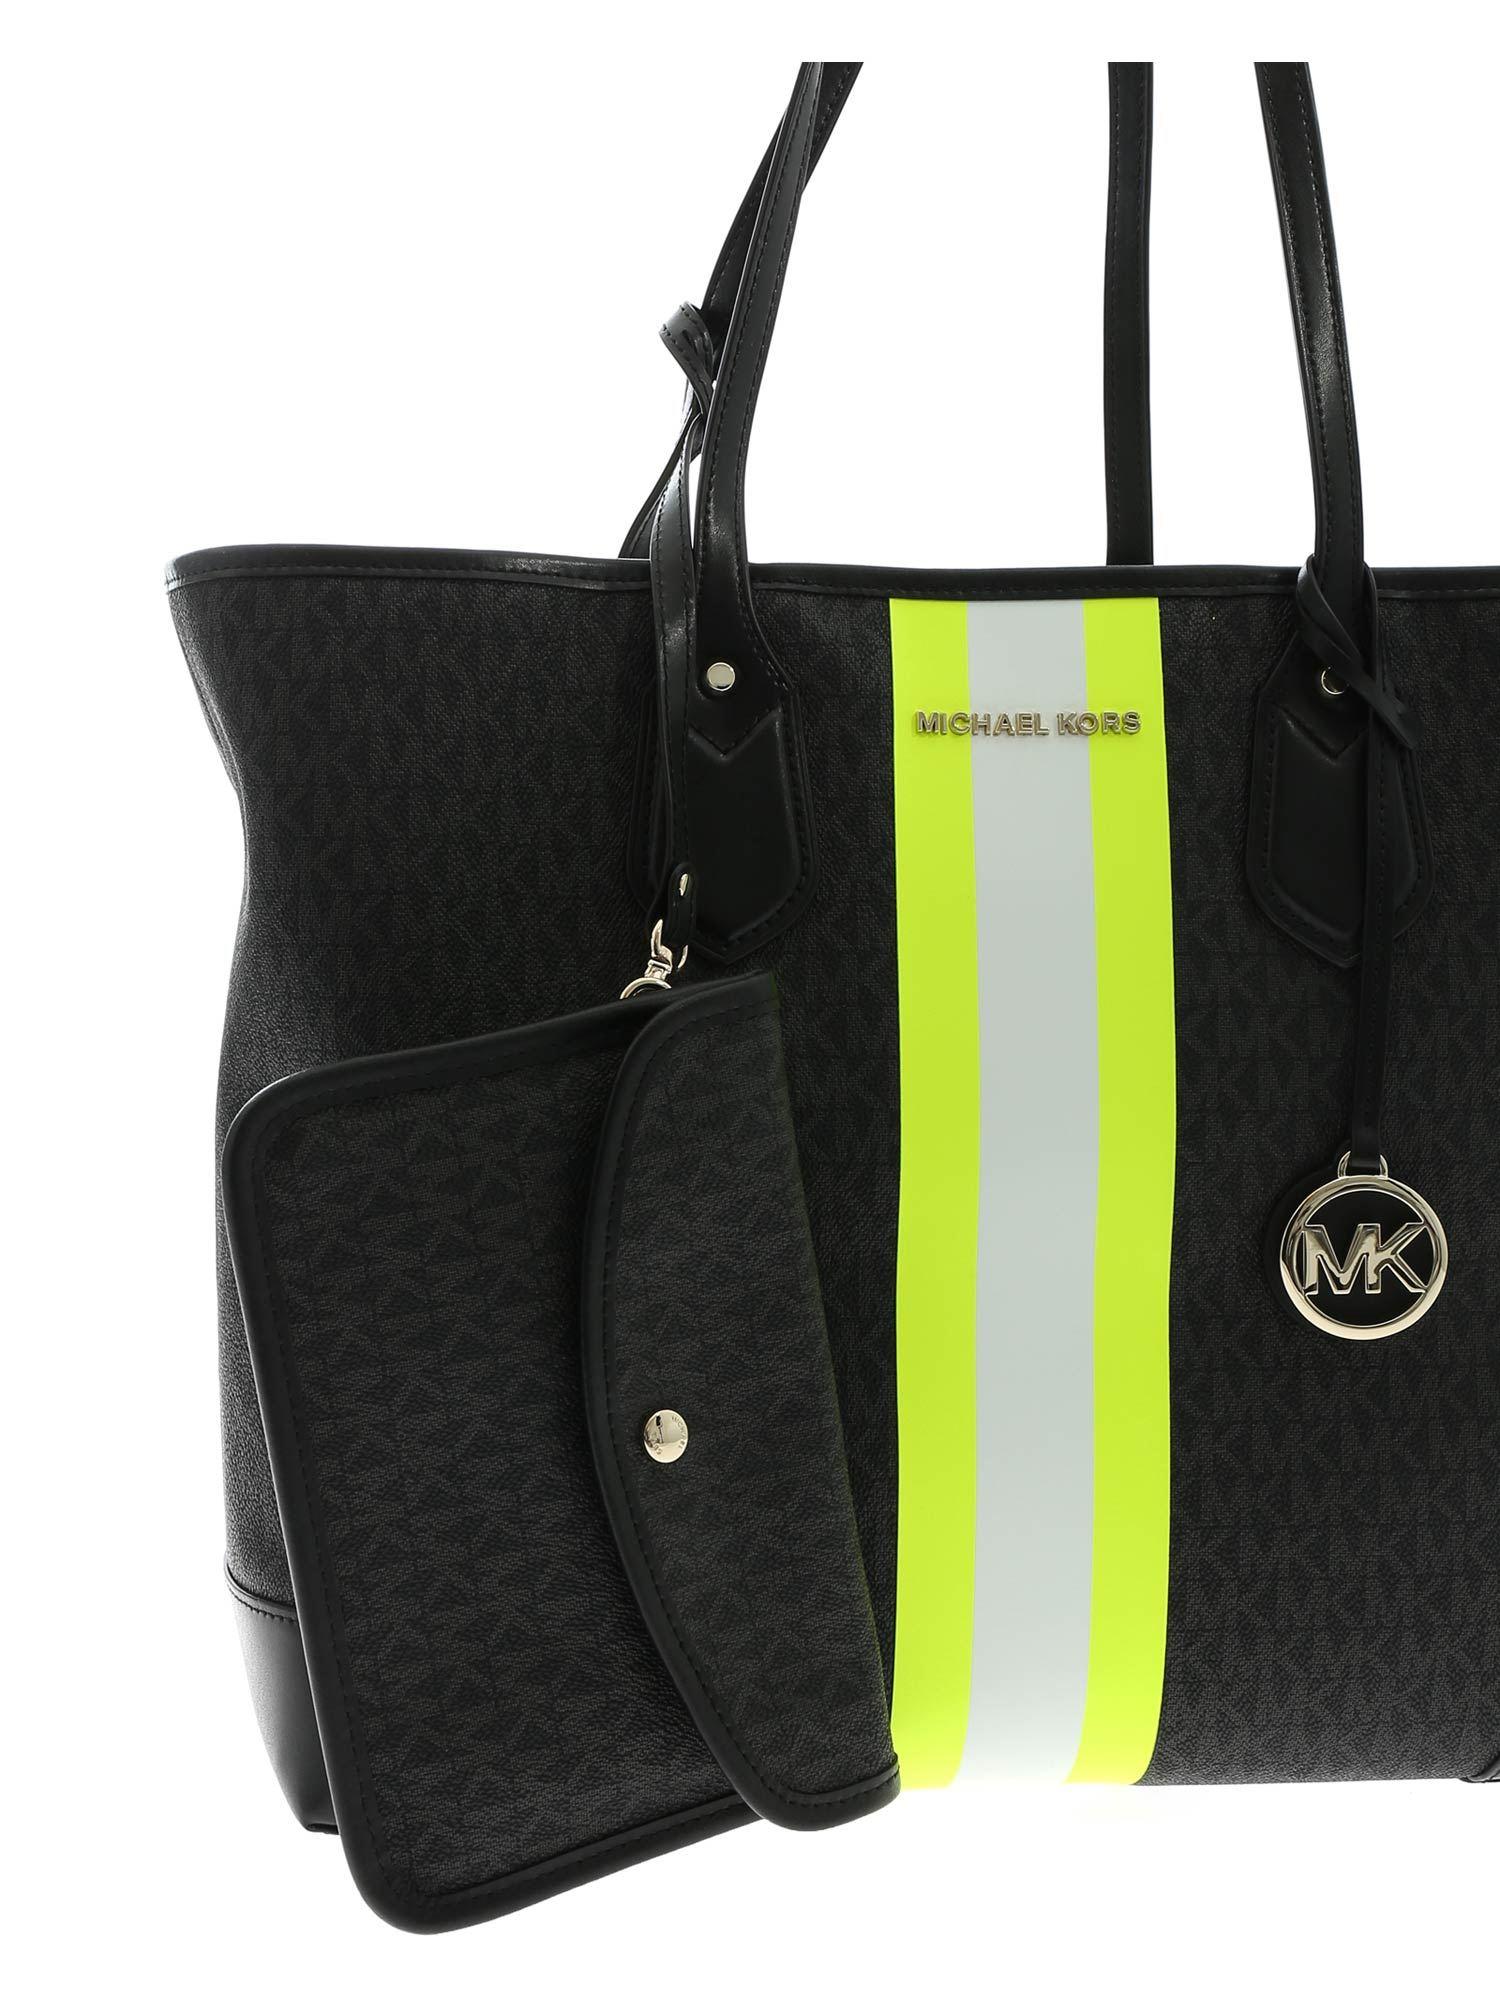 Michael Kors Leather Lg Tote Eva Bag In Black And Neon Yellow - Lyst